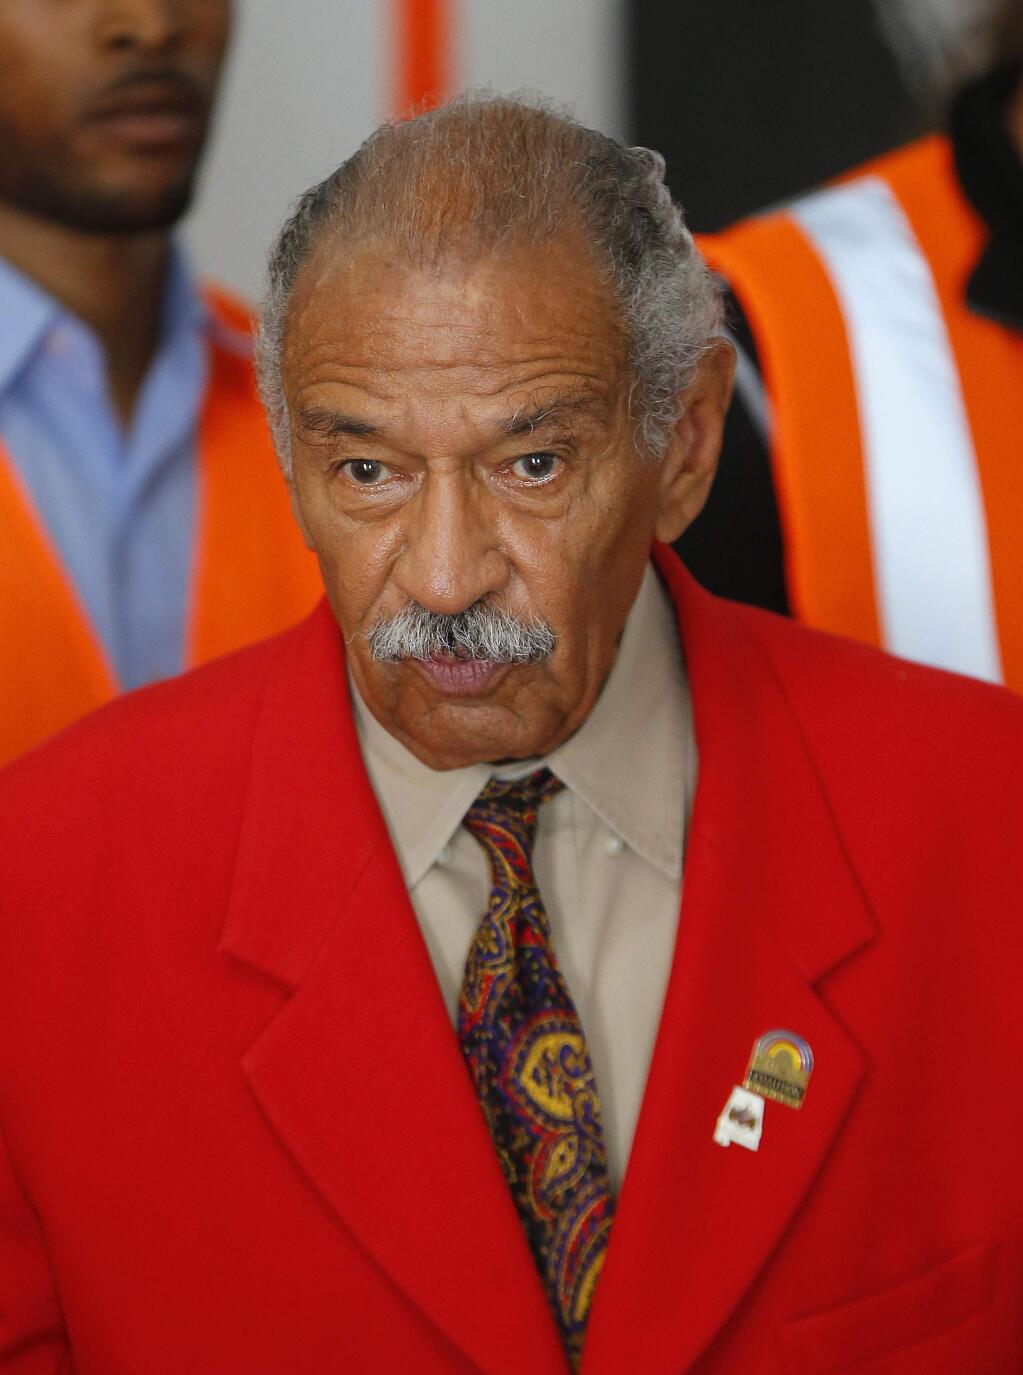 FILE - In this July 7, 2014 file photo, U.S. Rep. John Conyers, D-Mich., speaks in Detroit. The longtime Michigan Congressman on Tuesday, Nov. 21, 2017, denied settling a sexual harassment complaint in 2015 from a woman who alleged she was fired from his Washington staff because she rejected his sexual advances. (AP Photo/Paul Sancya)